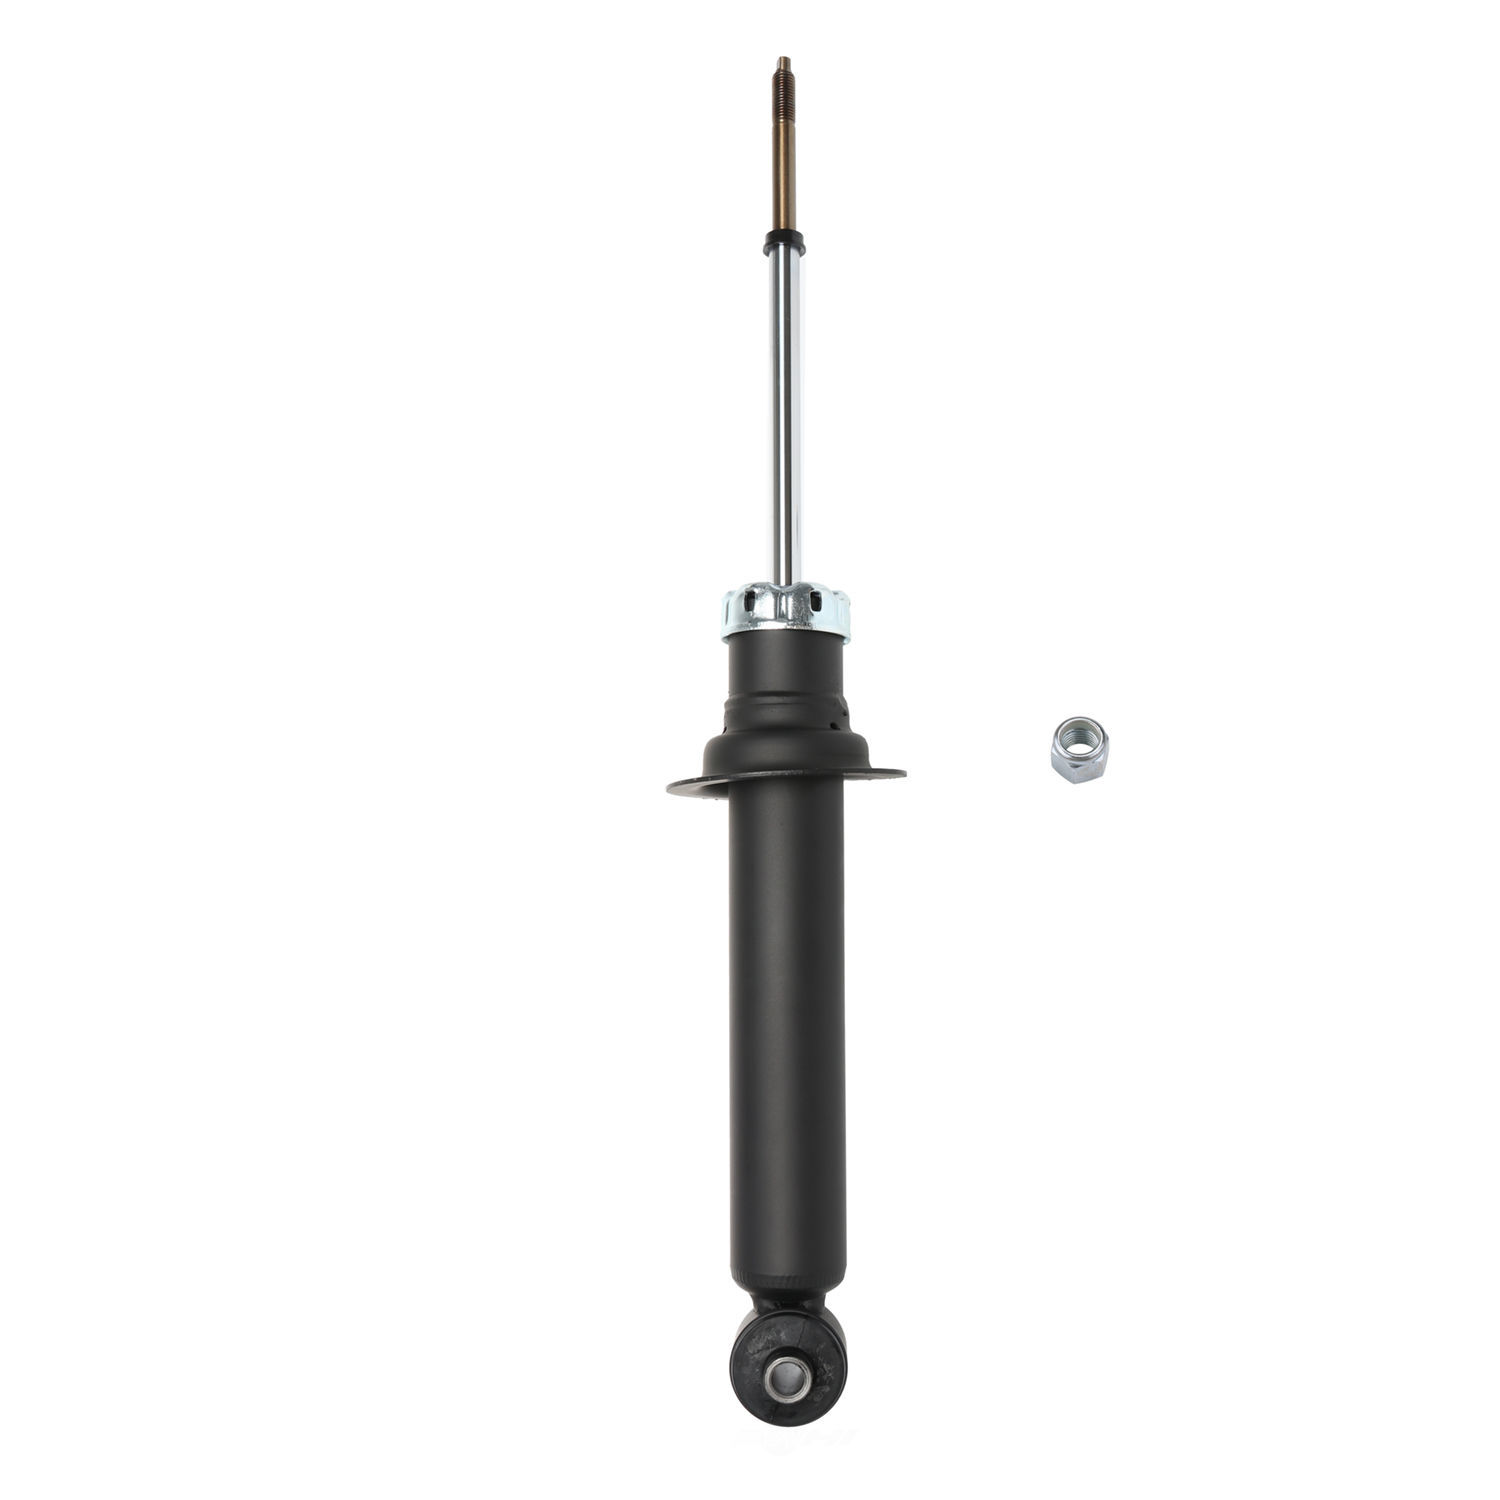 PERFORMANCE RIDE TECHNOLOGY BY ADD - Suspension Strut Assembly - P6T 372046